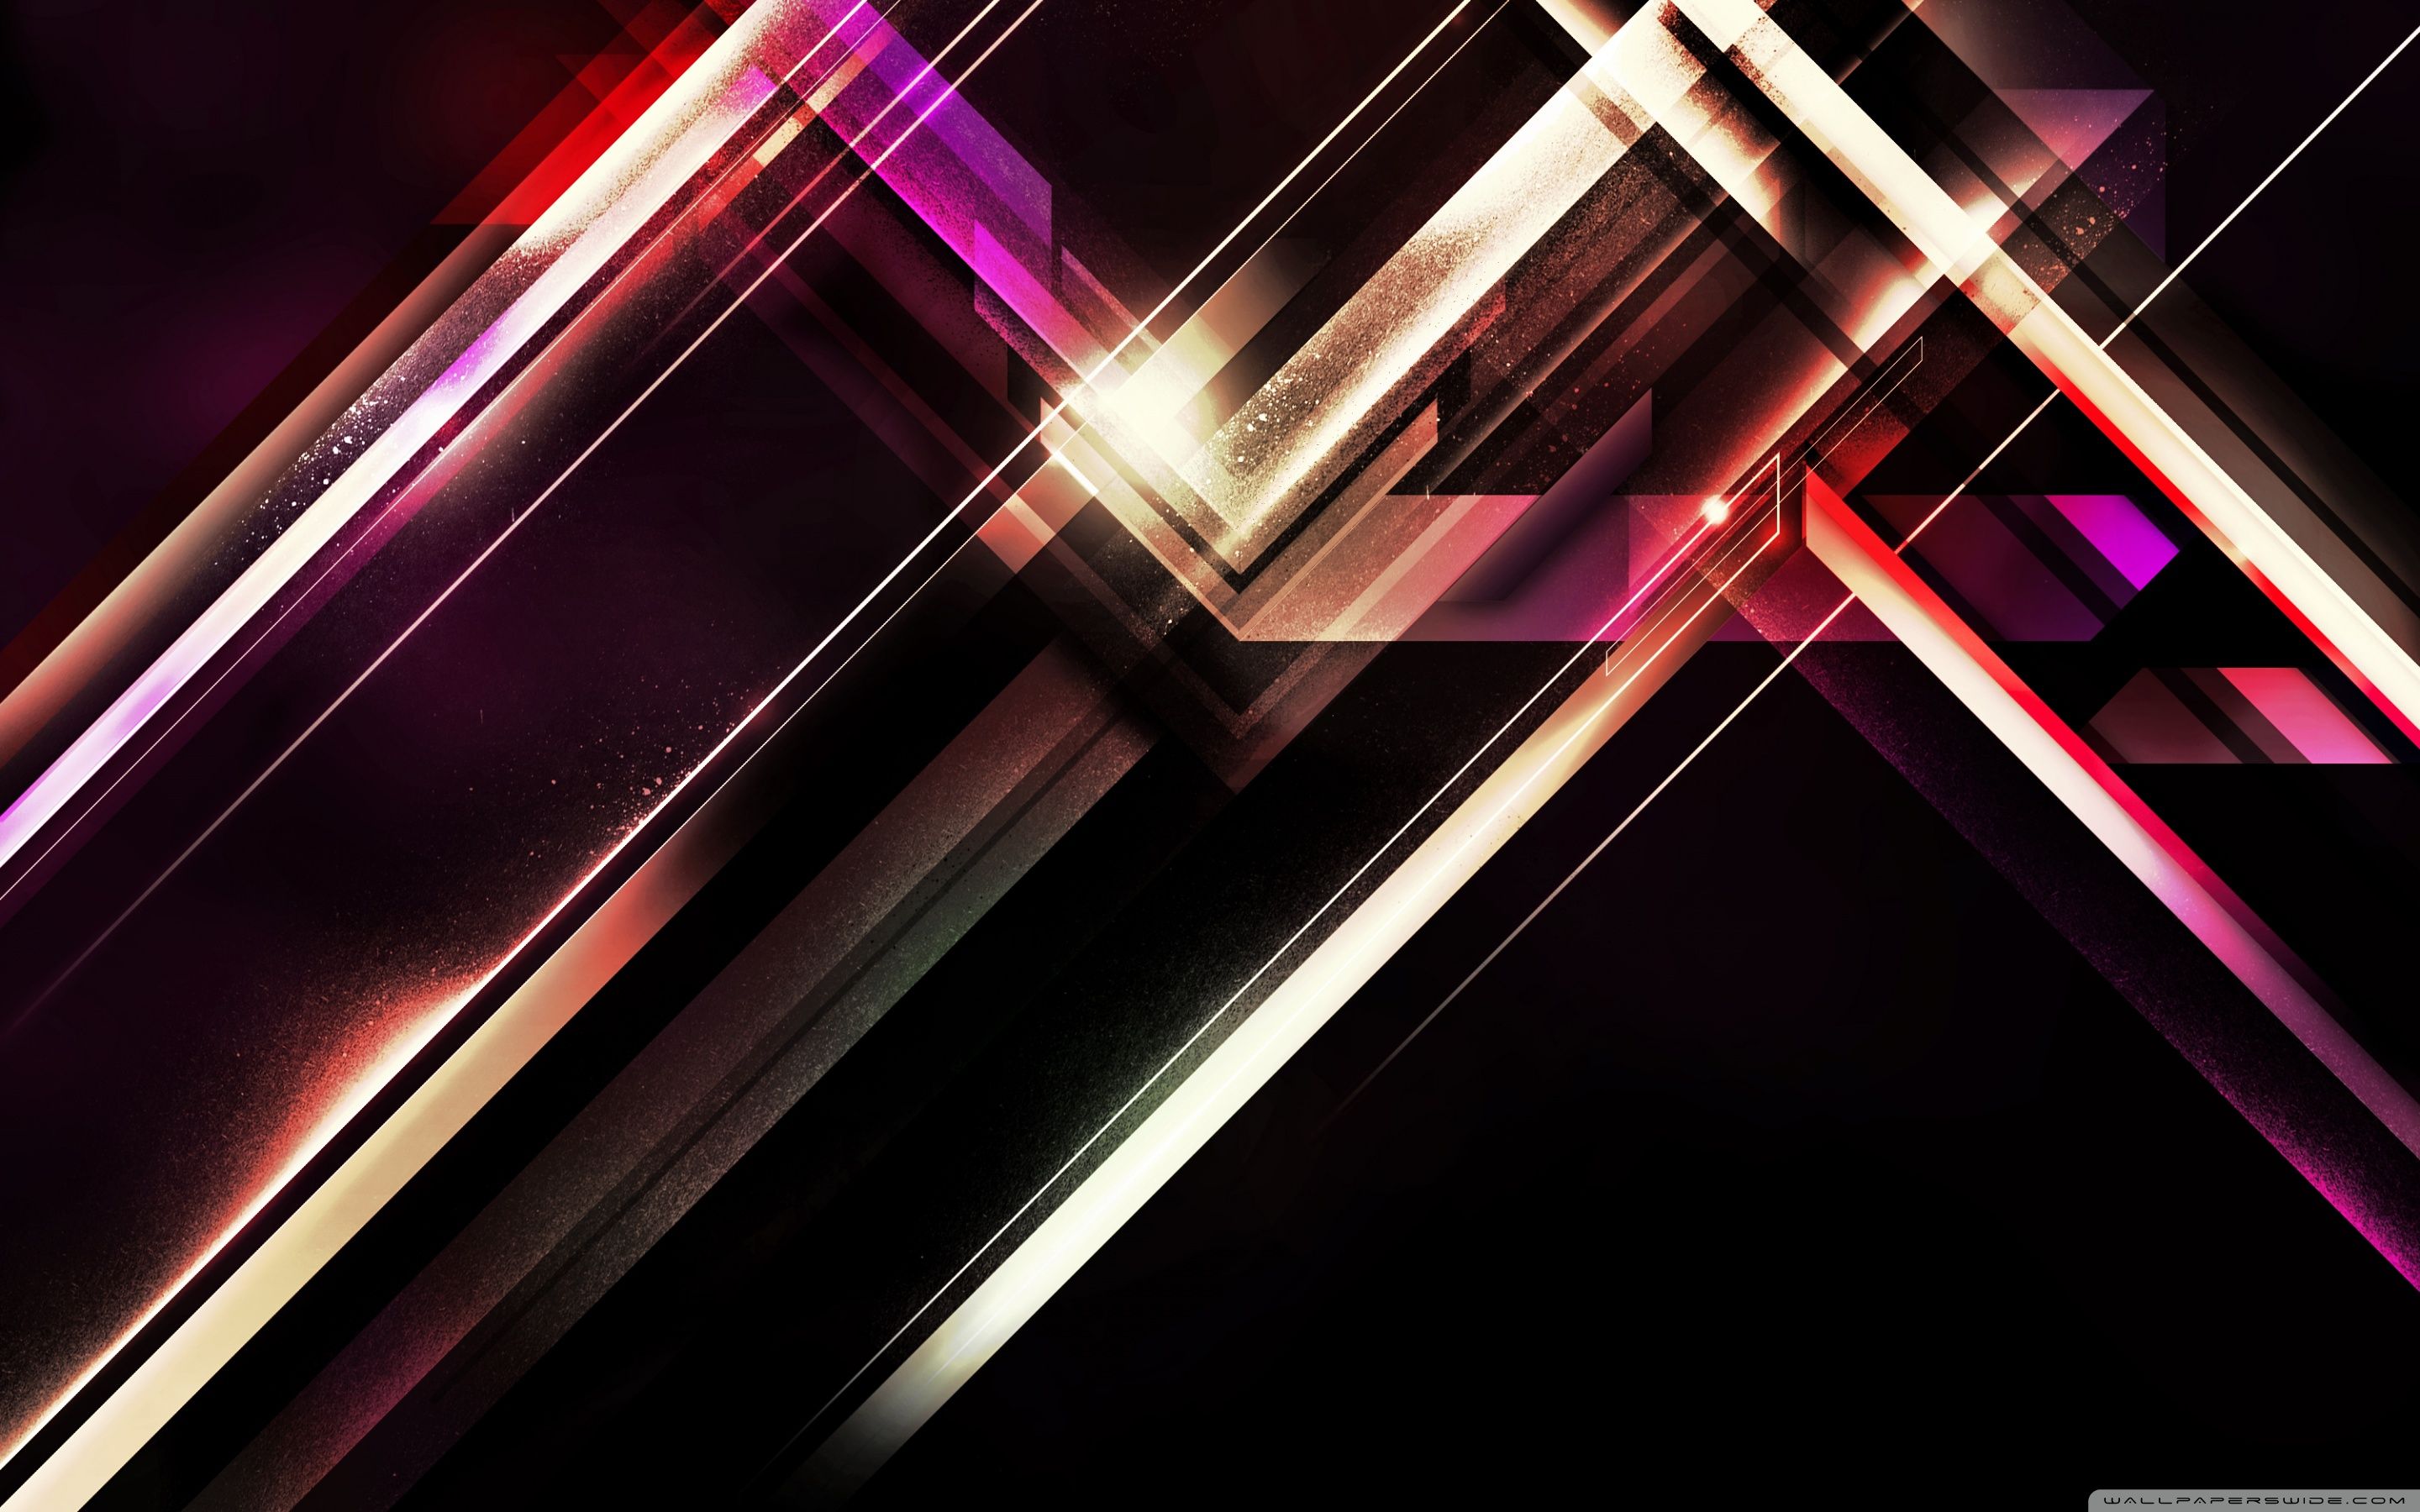 Crystal Hd Wallpapers posted by Christopher Peltier